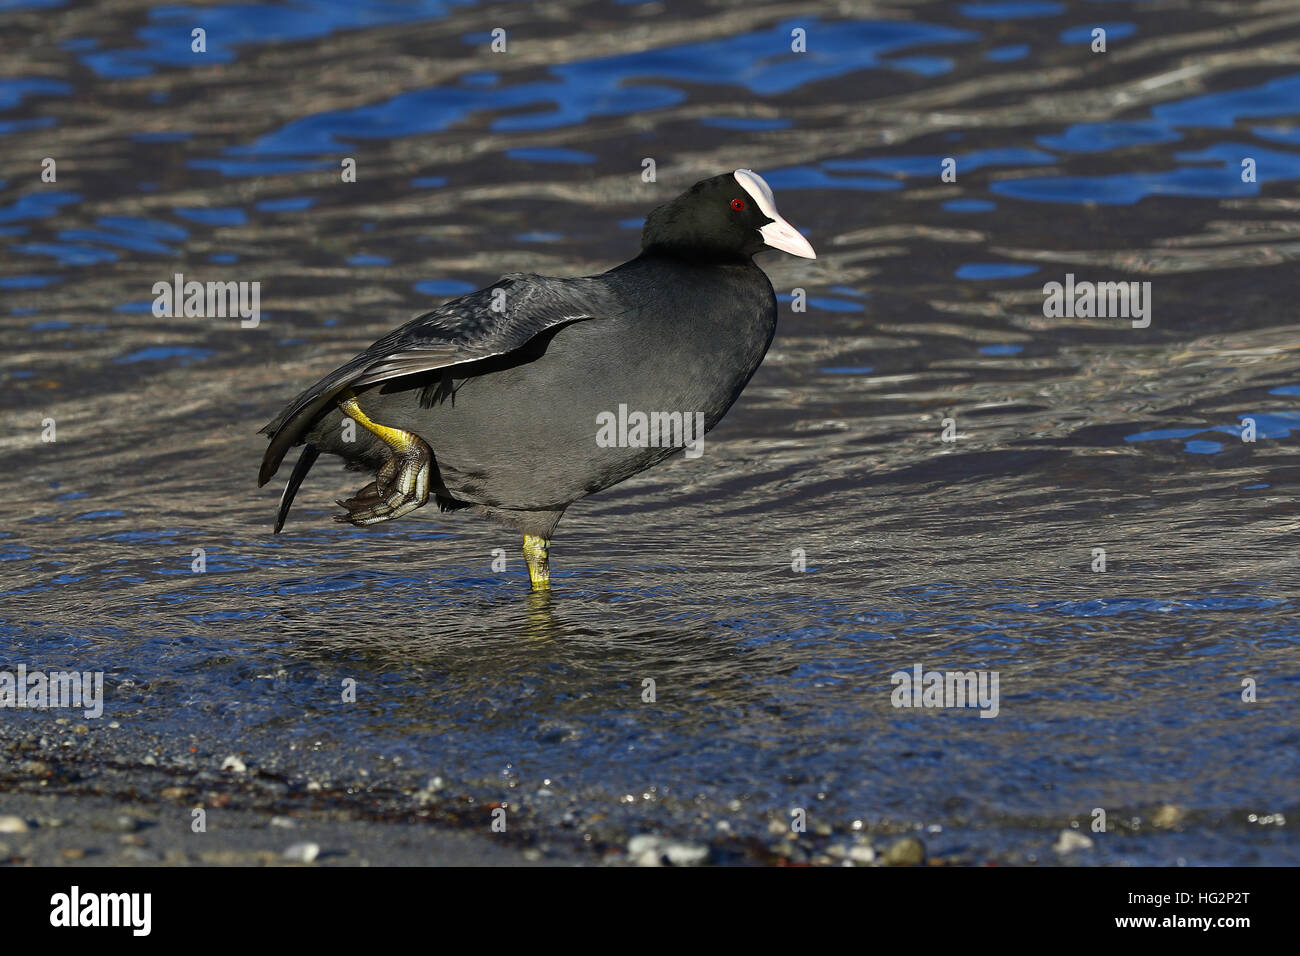 Eurasian coot, Fulica Atra, in shallow water streching its legs and wings at the lake shore Stock Photo